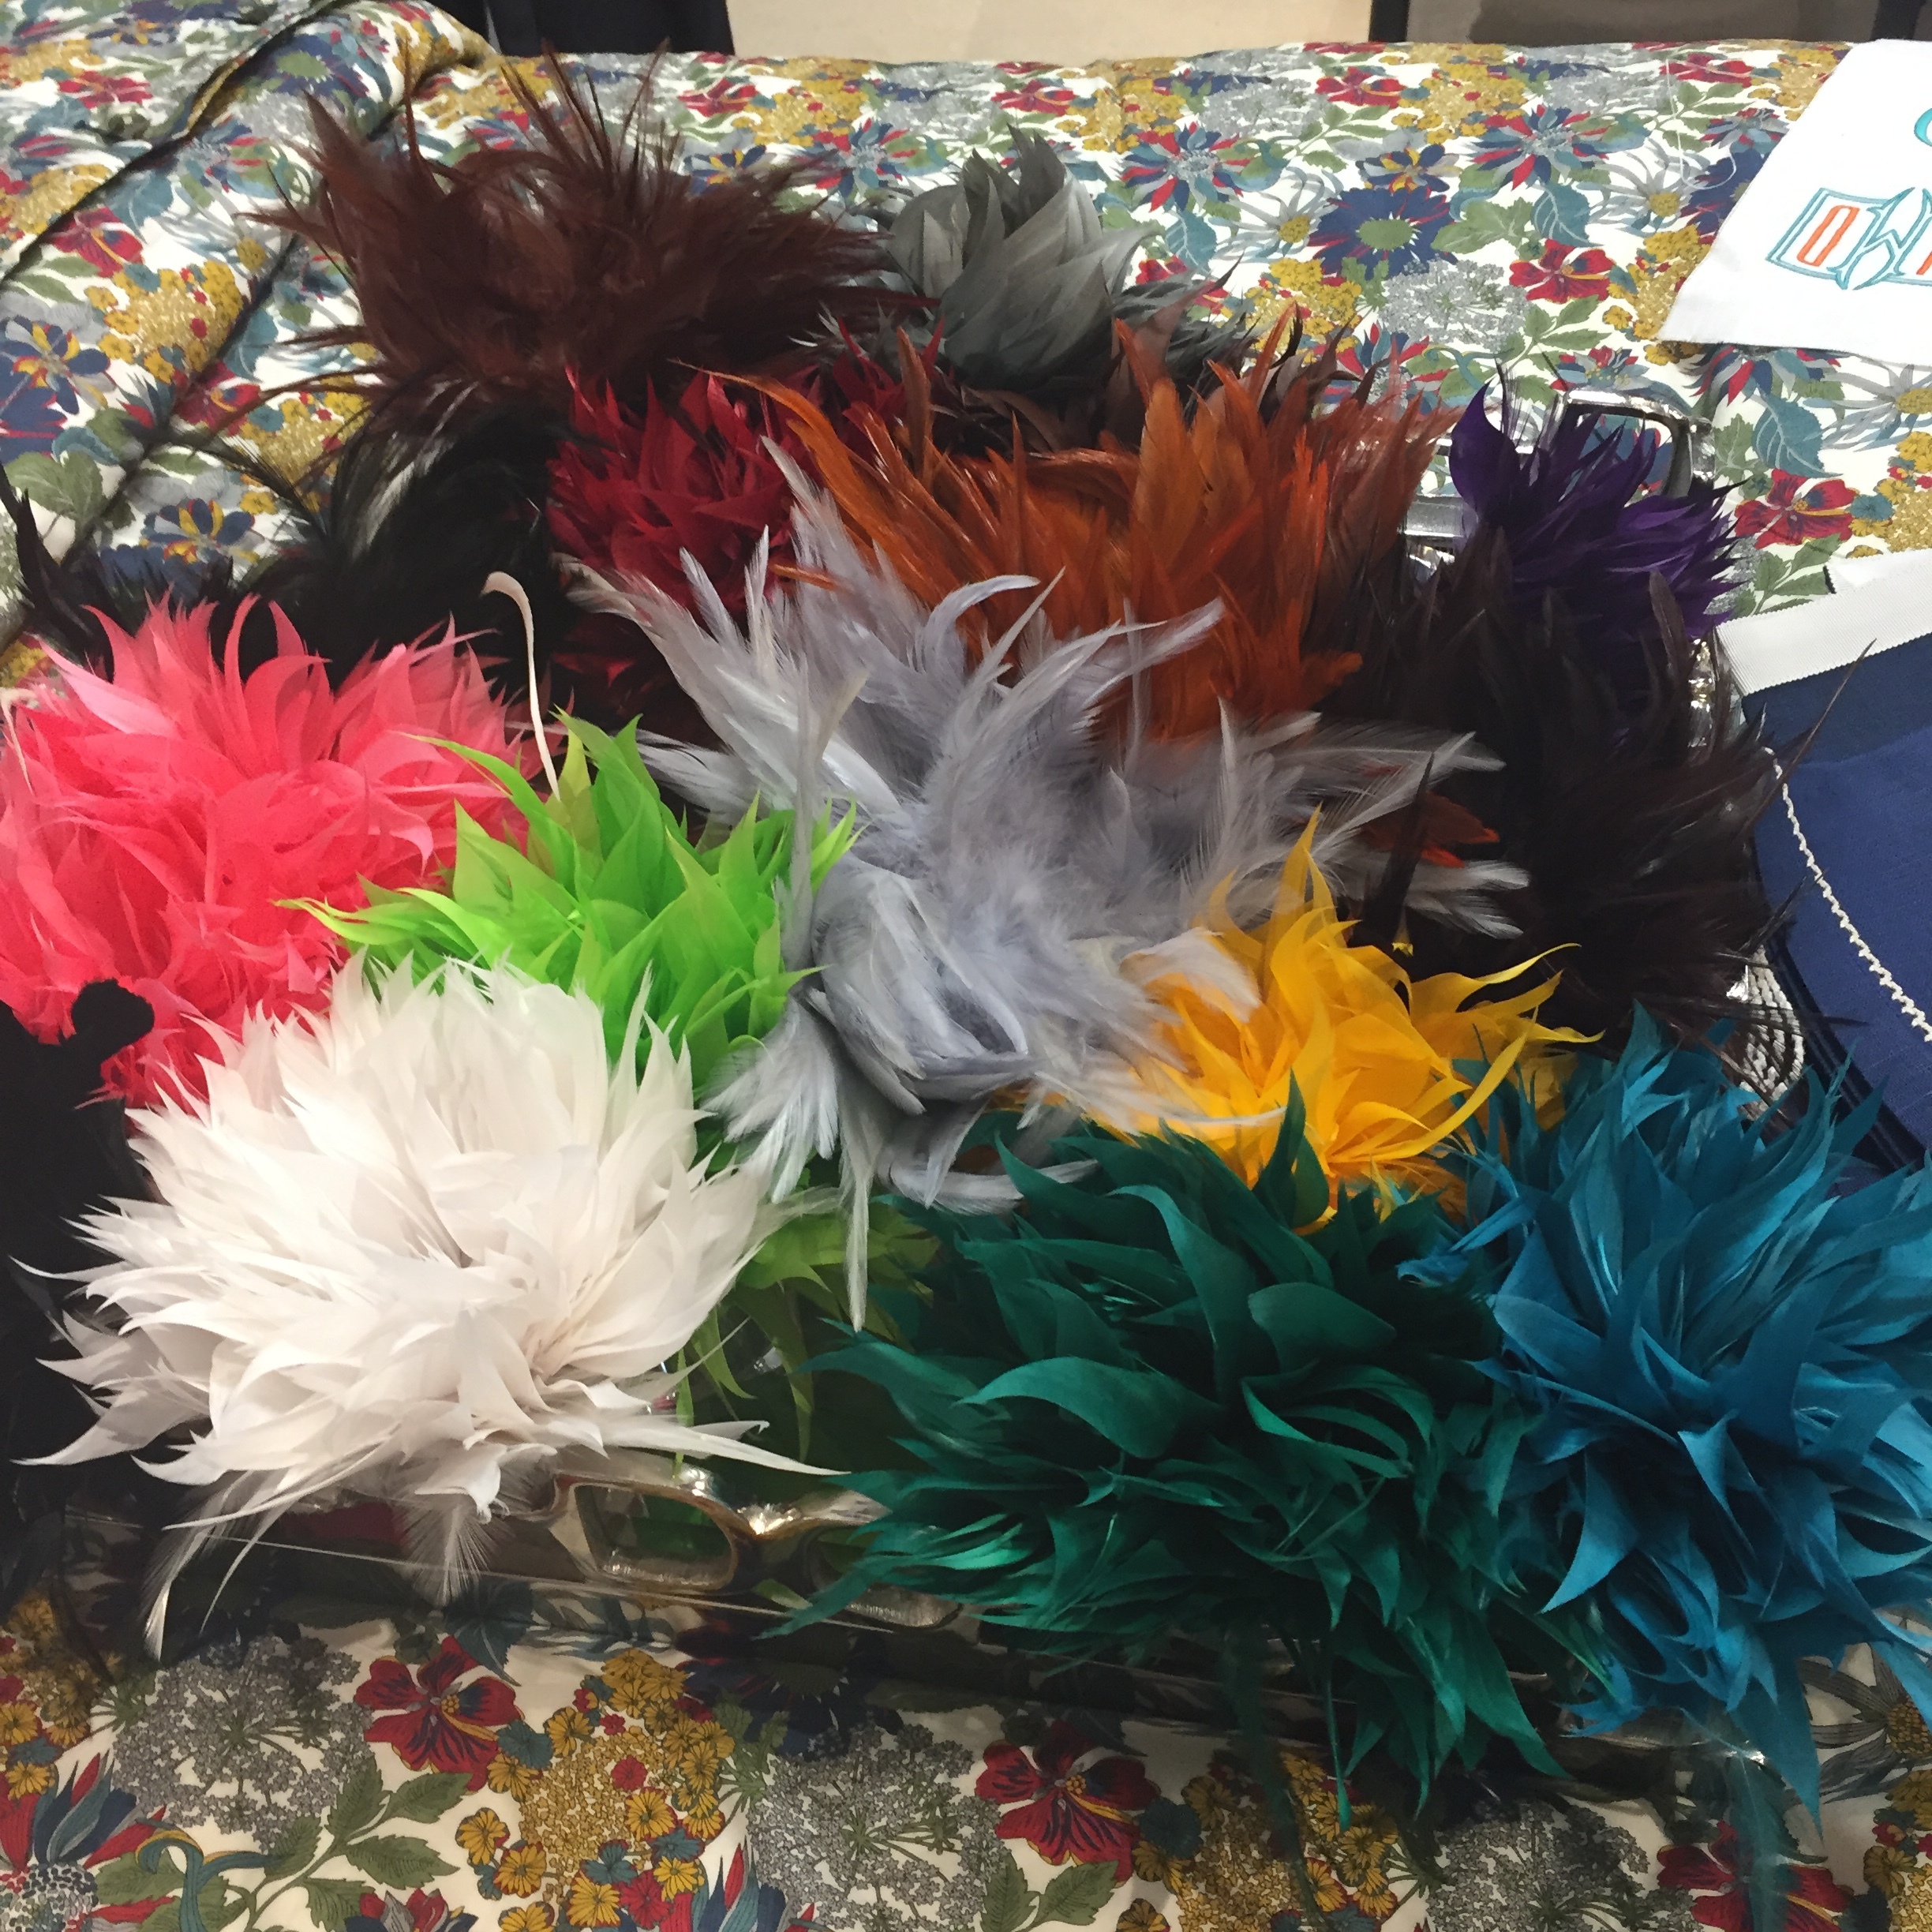 Playful feather napkin rings - what a way to dress up a table!